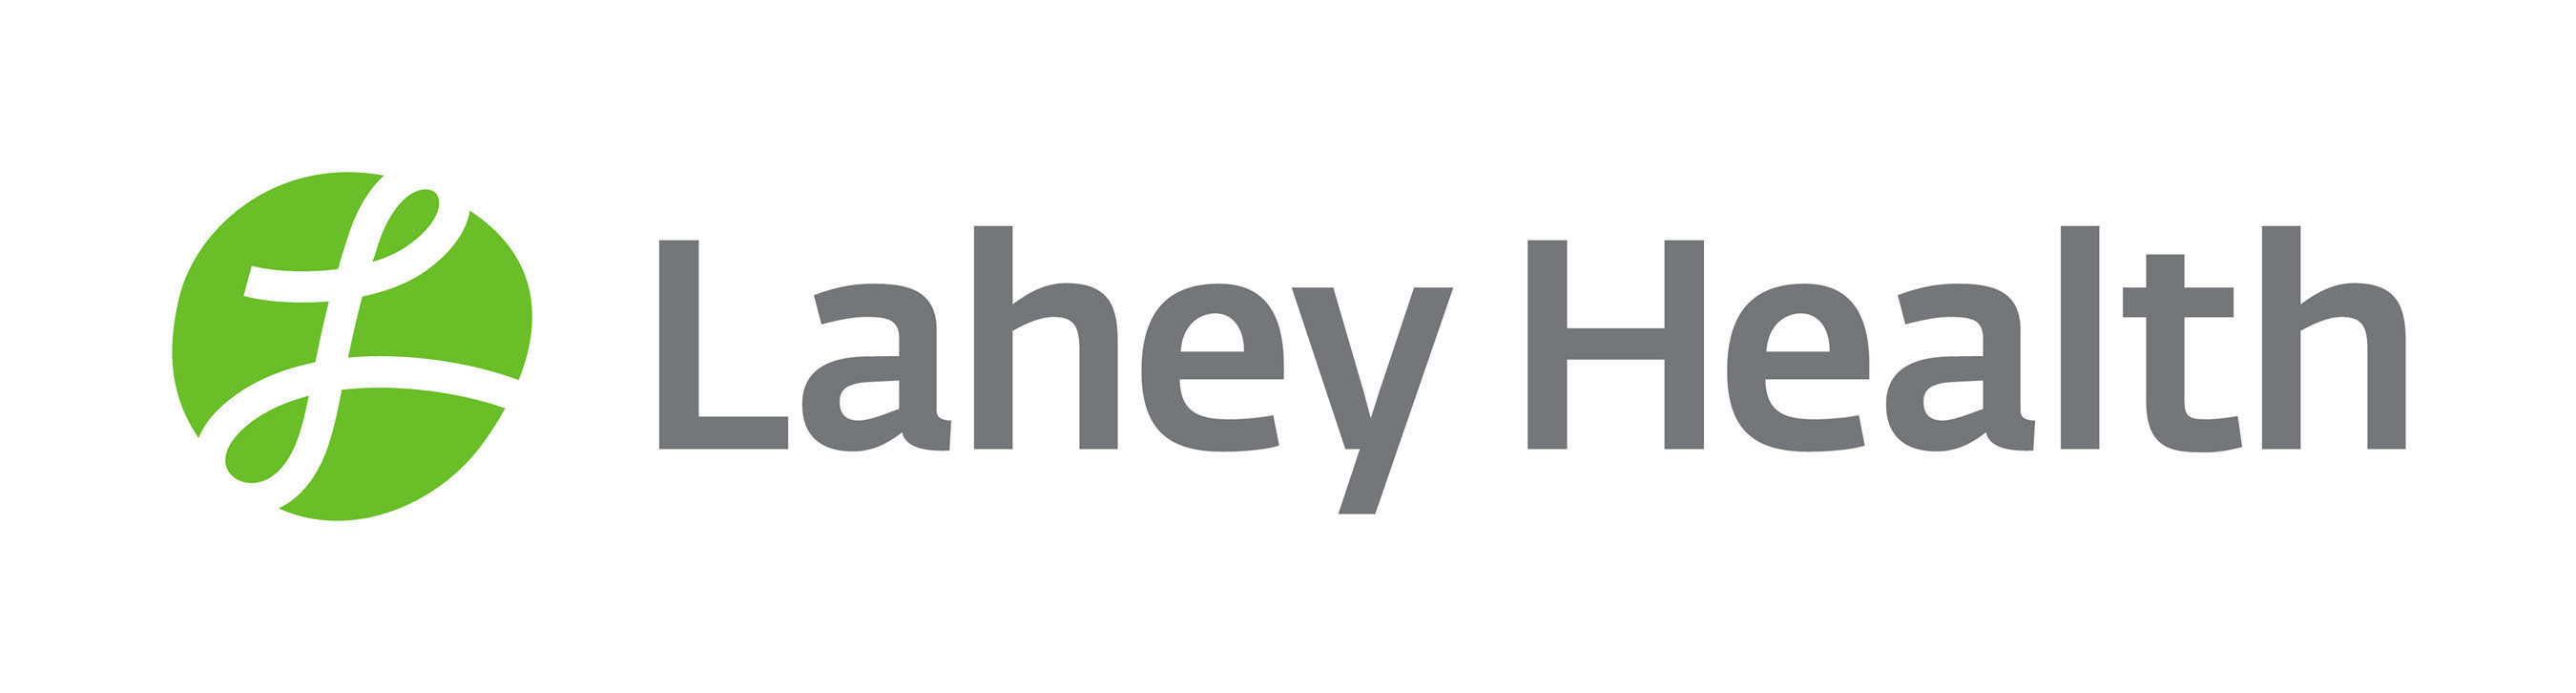 Lahey Health Launches New Brand Campaign: Focuses on Integrated ...